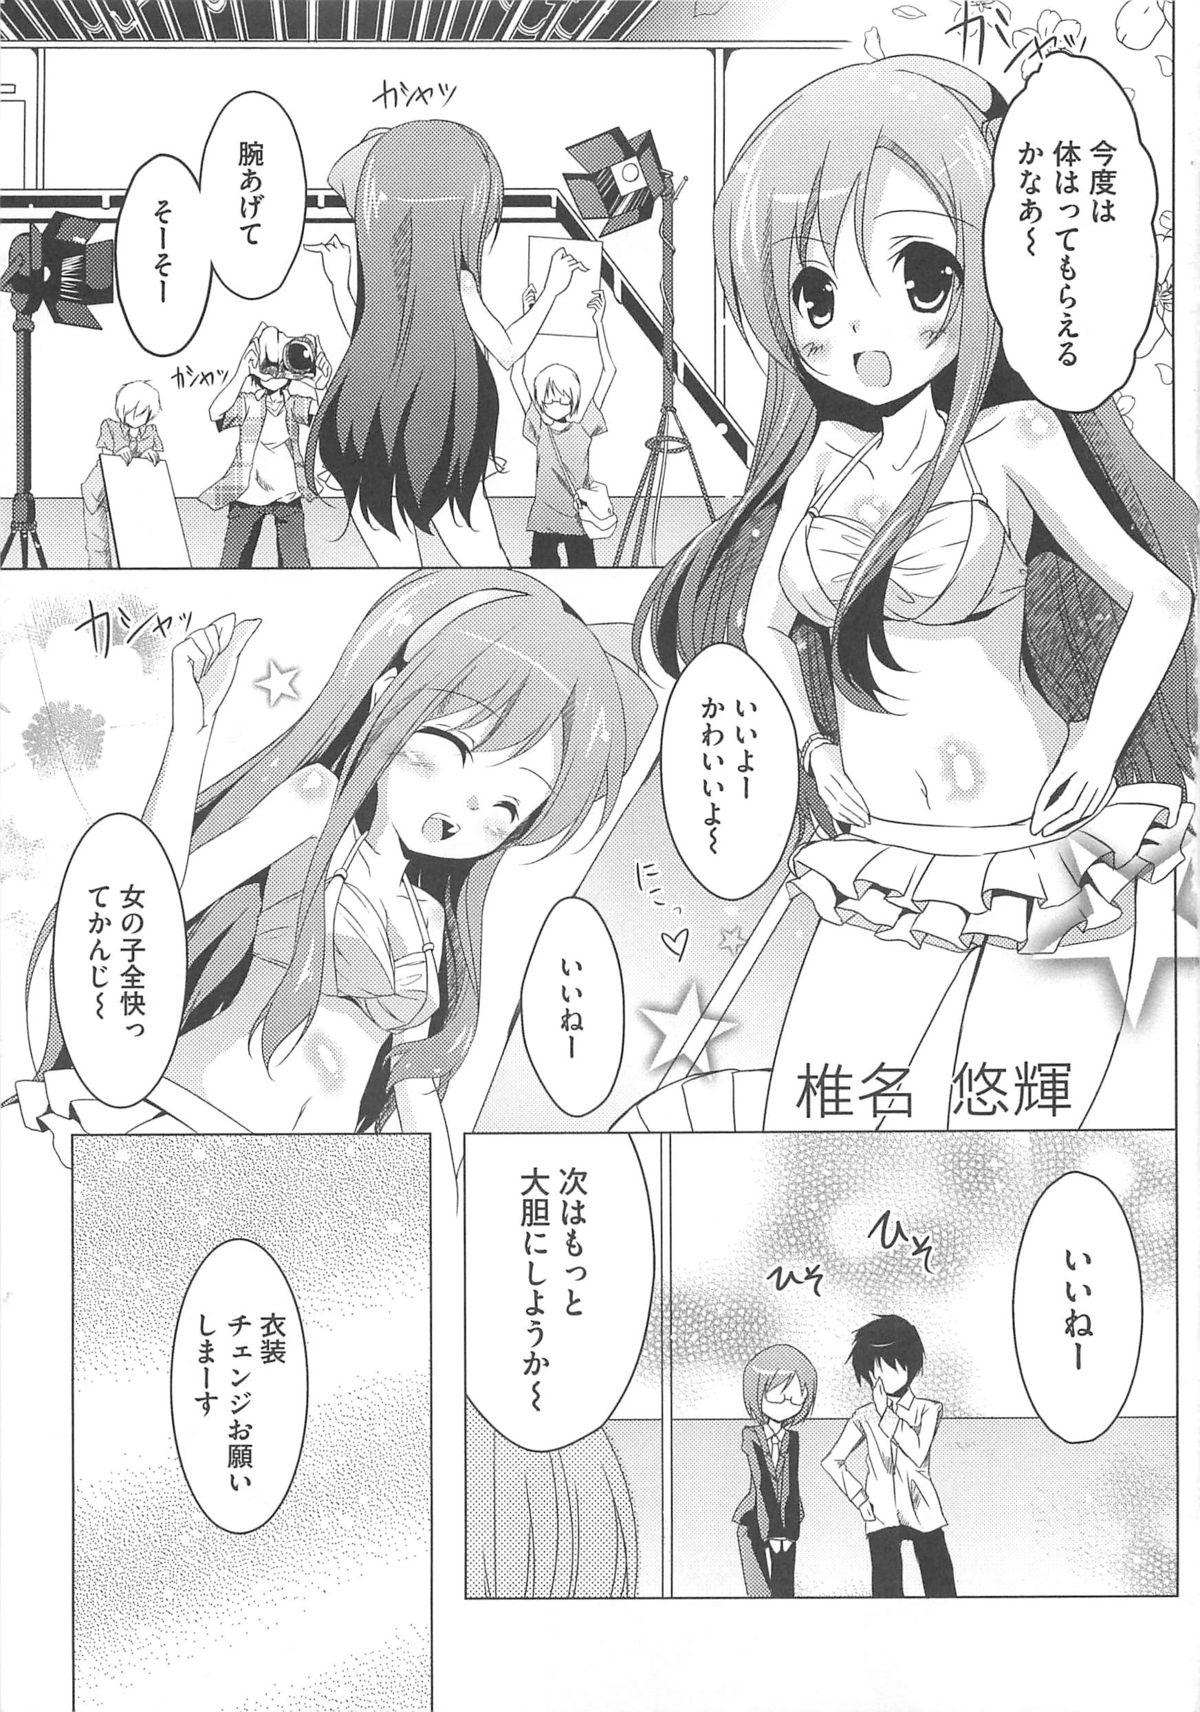 Foreplay Cure Bitch Sakura!! HC - Heartcatch precure Family - Page 4